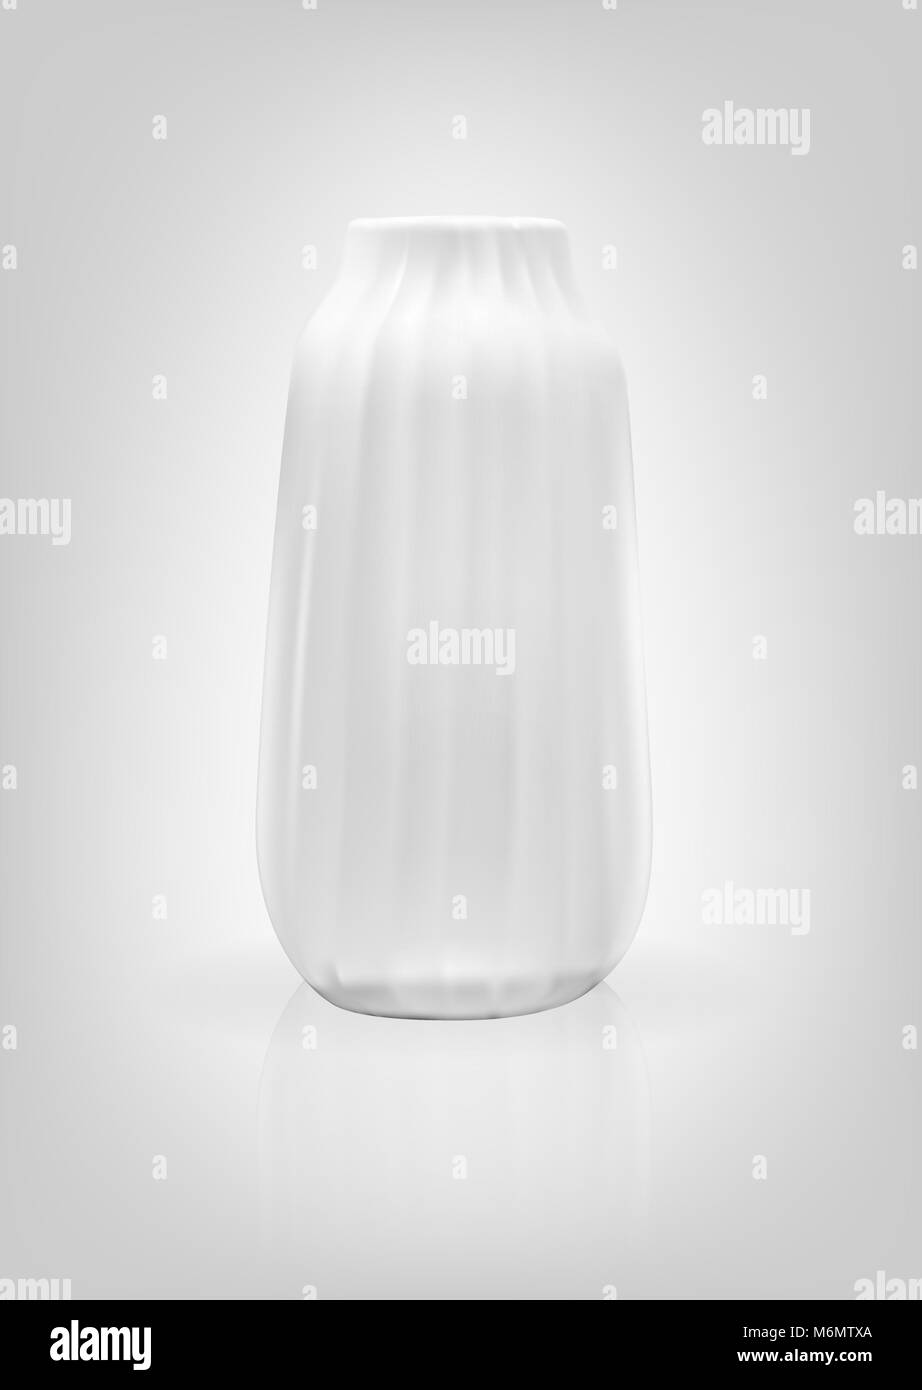 Realistic 3D model of vase white color on gray background. Vector Illustration. Stock Vector